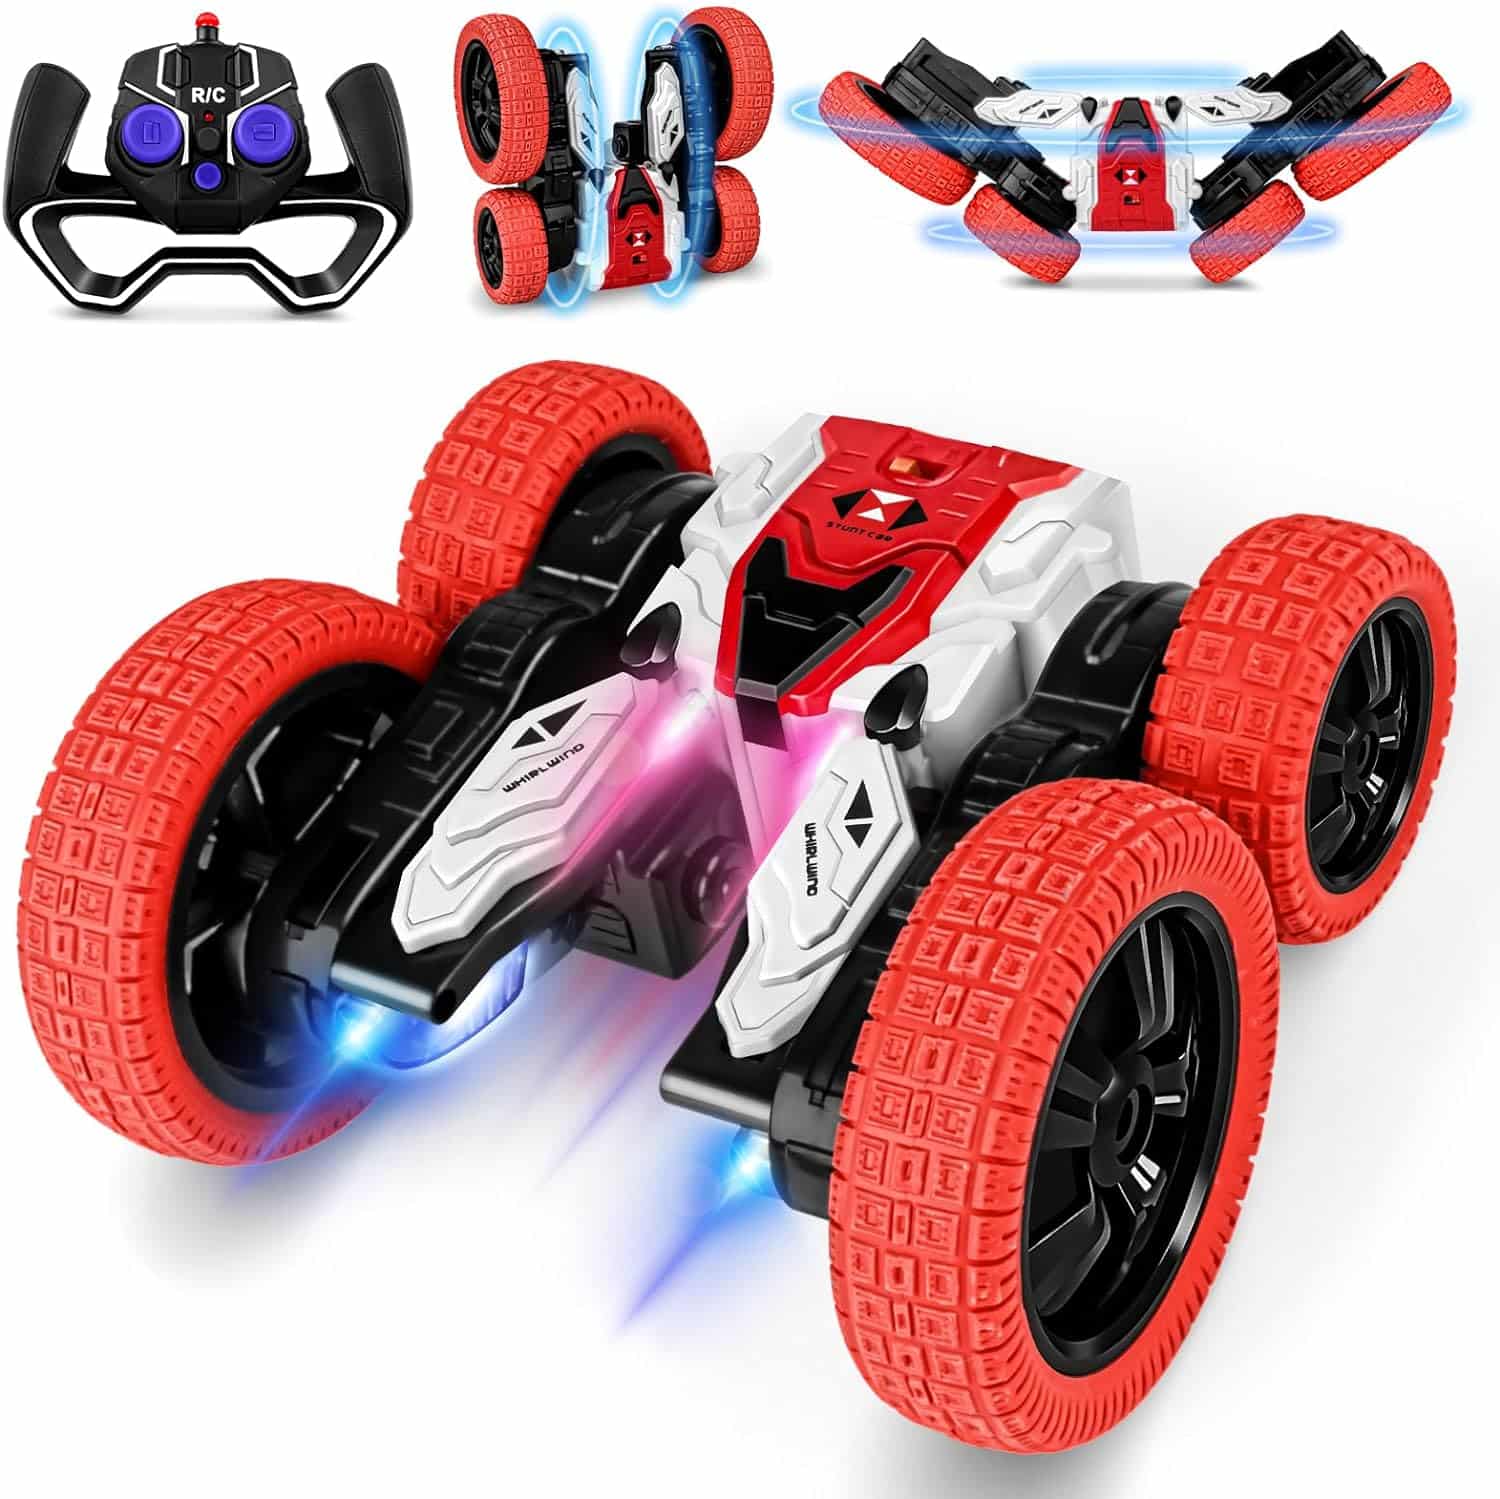 RC Stunt Car for Kids – The Ultimate Remote Control Car Review